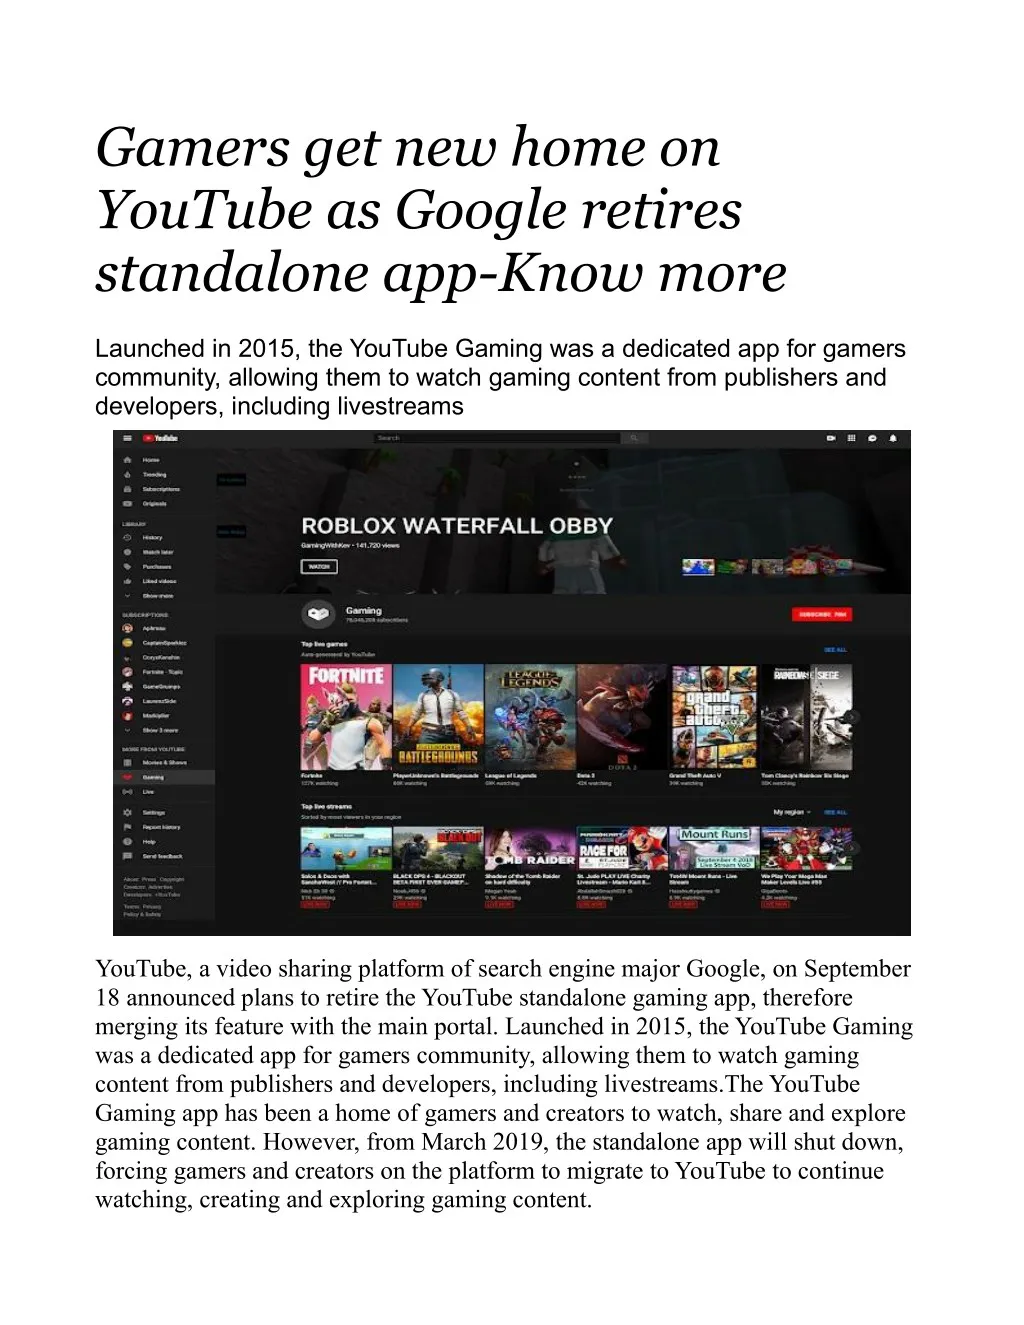 gamers get new home on youtube as google retires